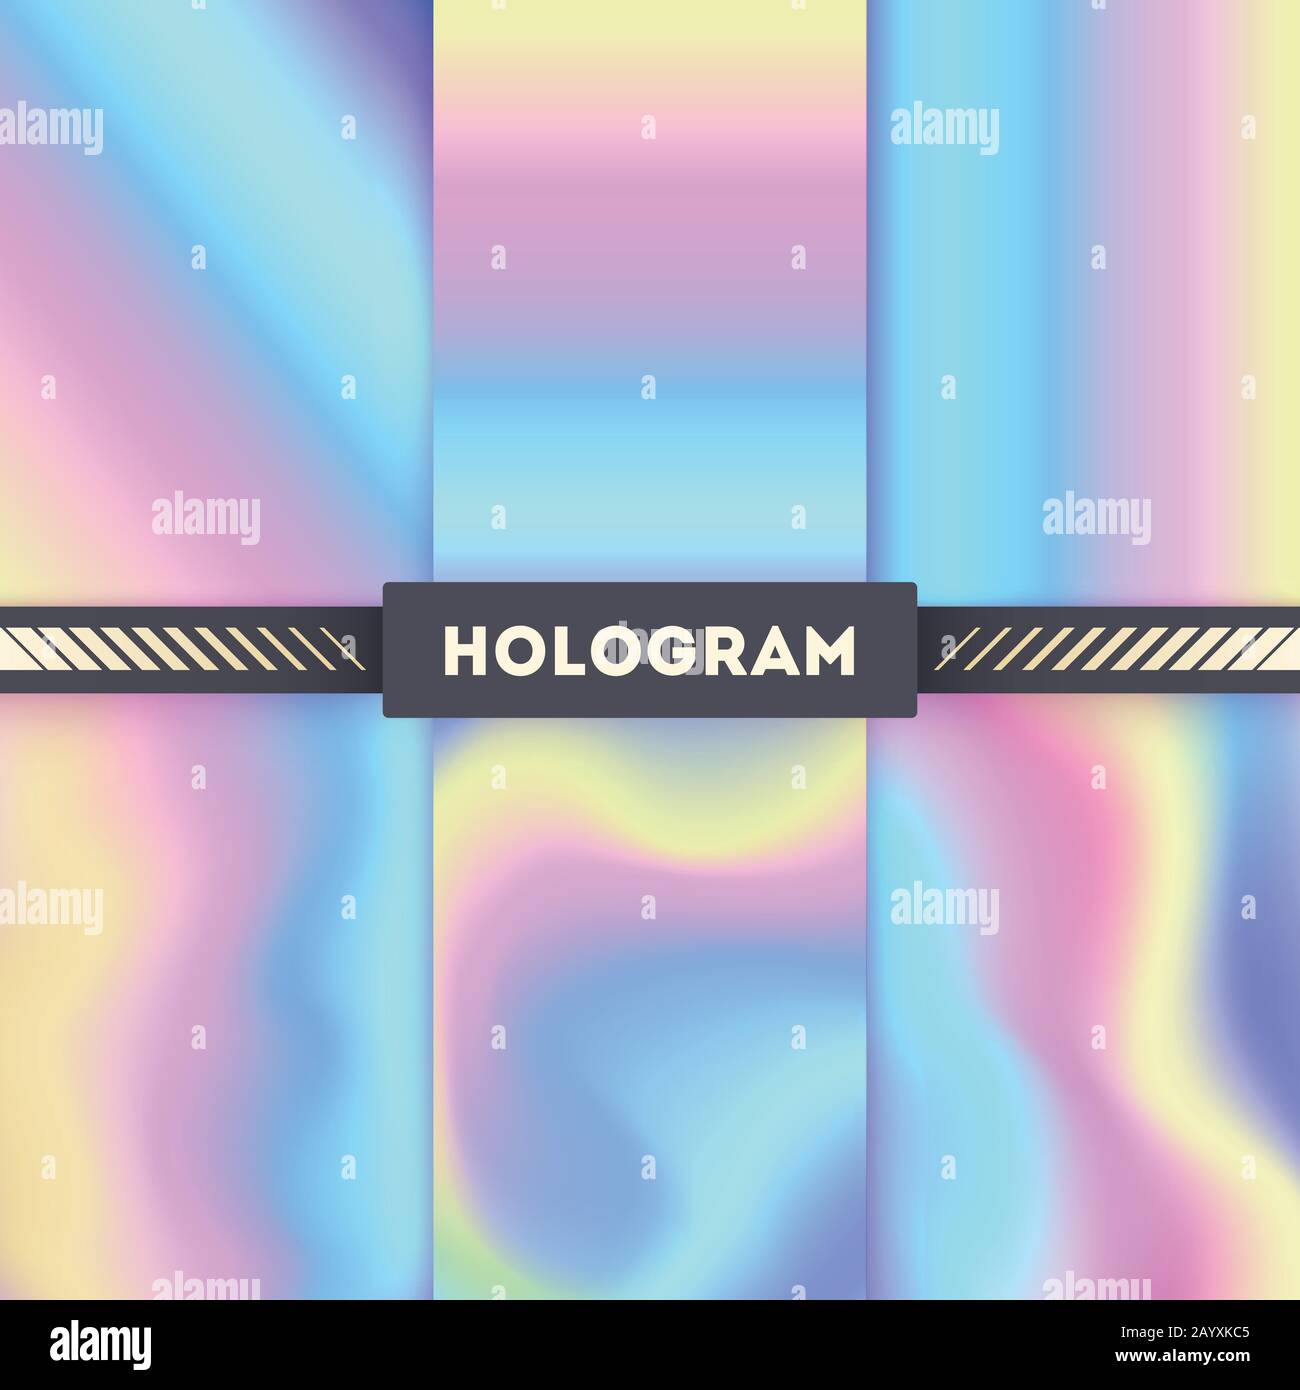 Colored Hologram Vector Backgrounds For Sticker Hologram Pattern Color Tone And Bright Rainbow Shiny Hologram Illustration Stock Vector Image Art Alamy